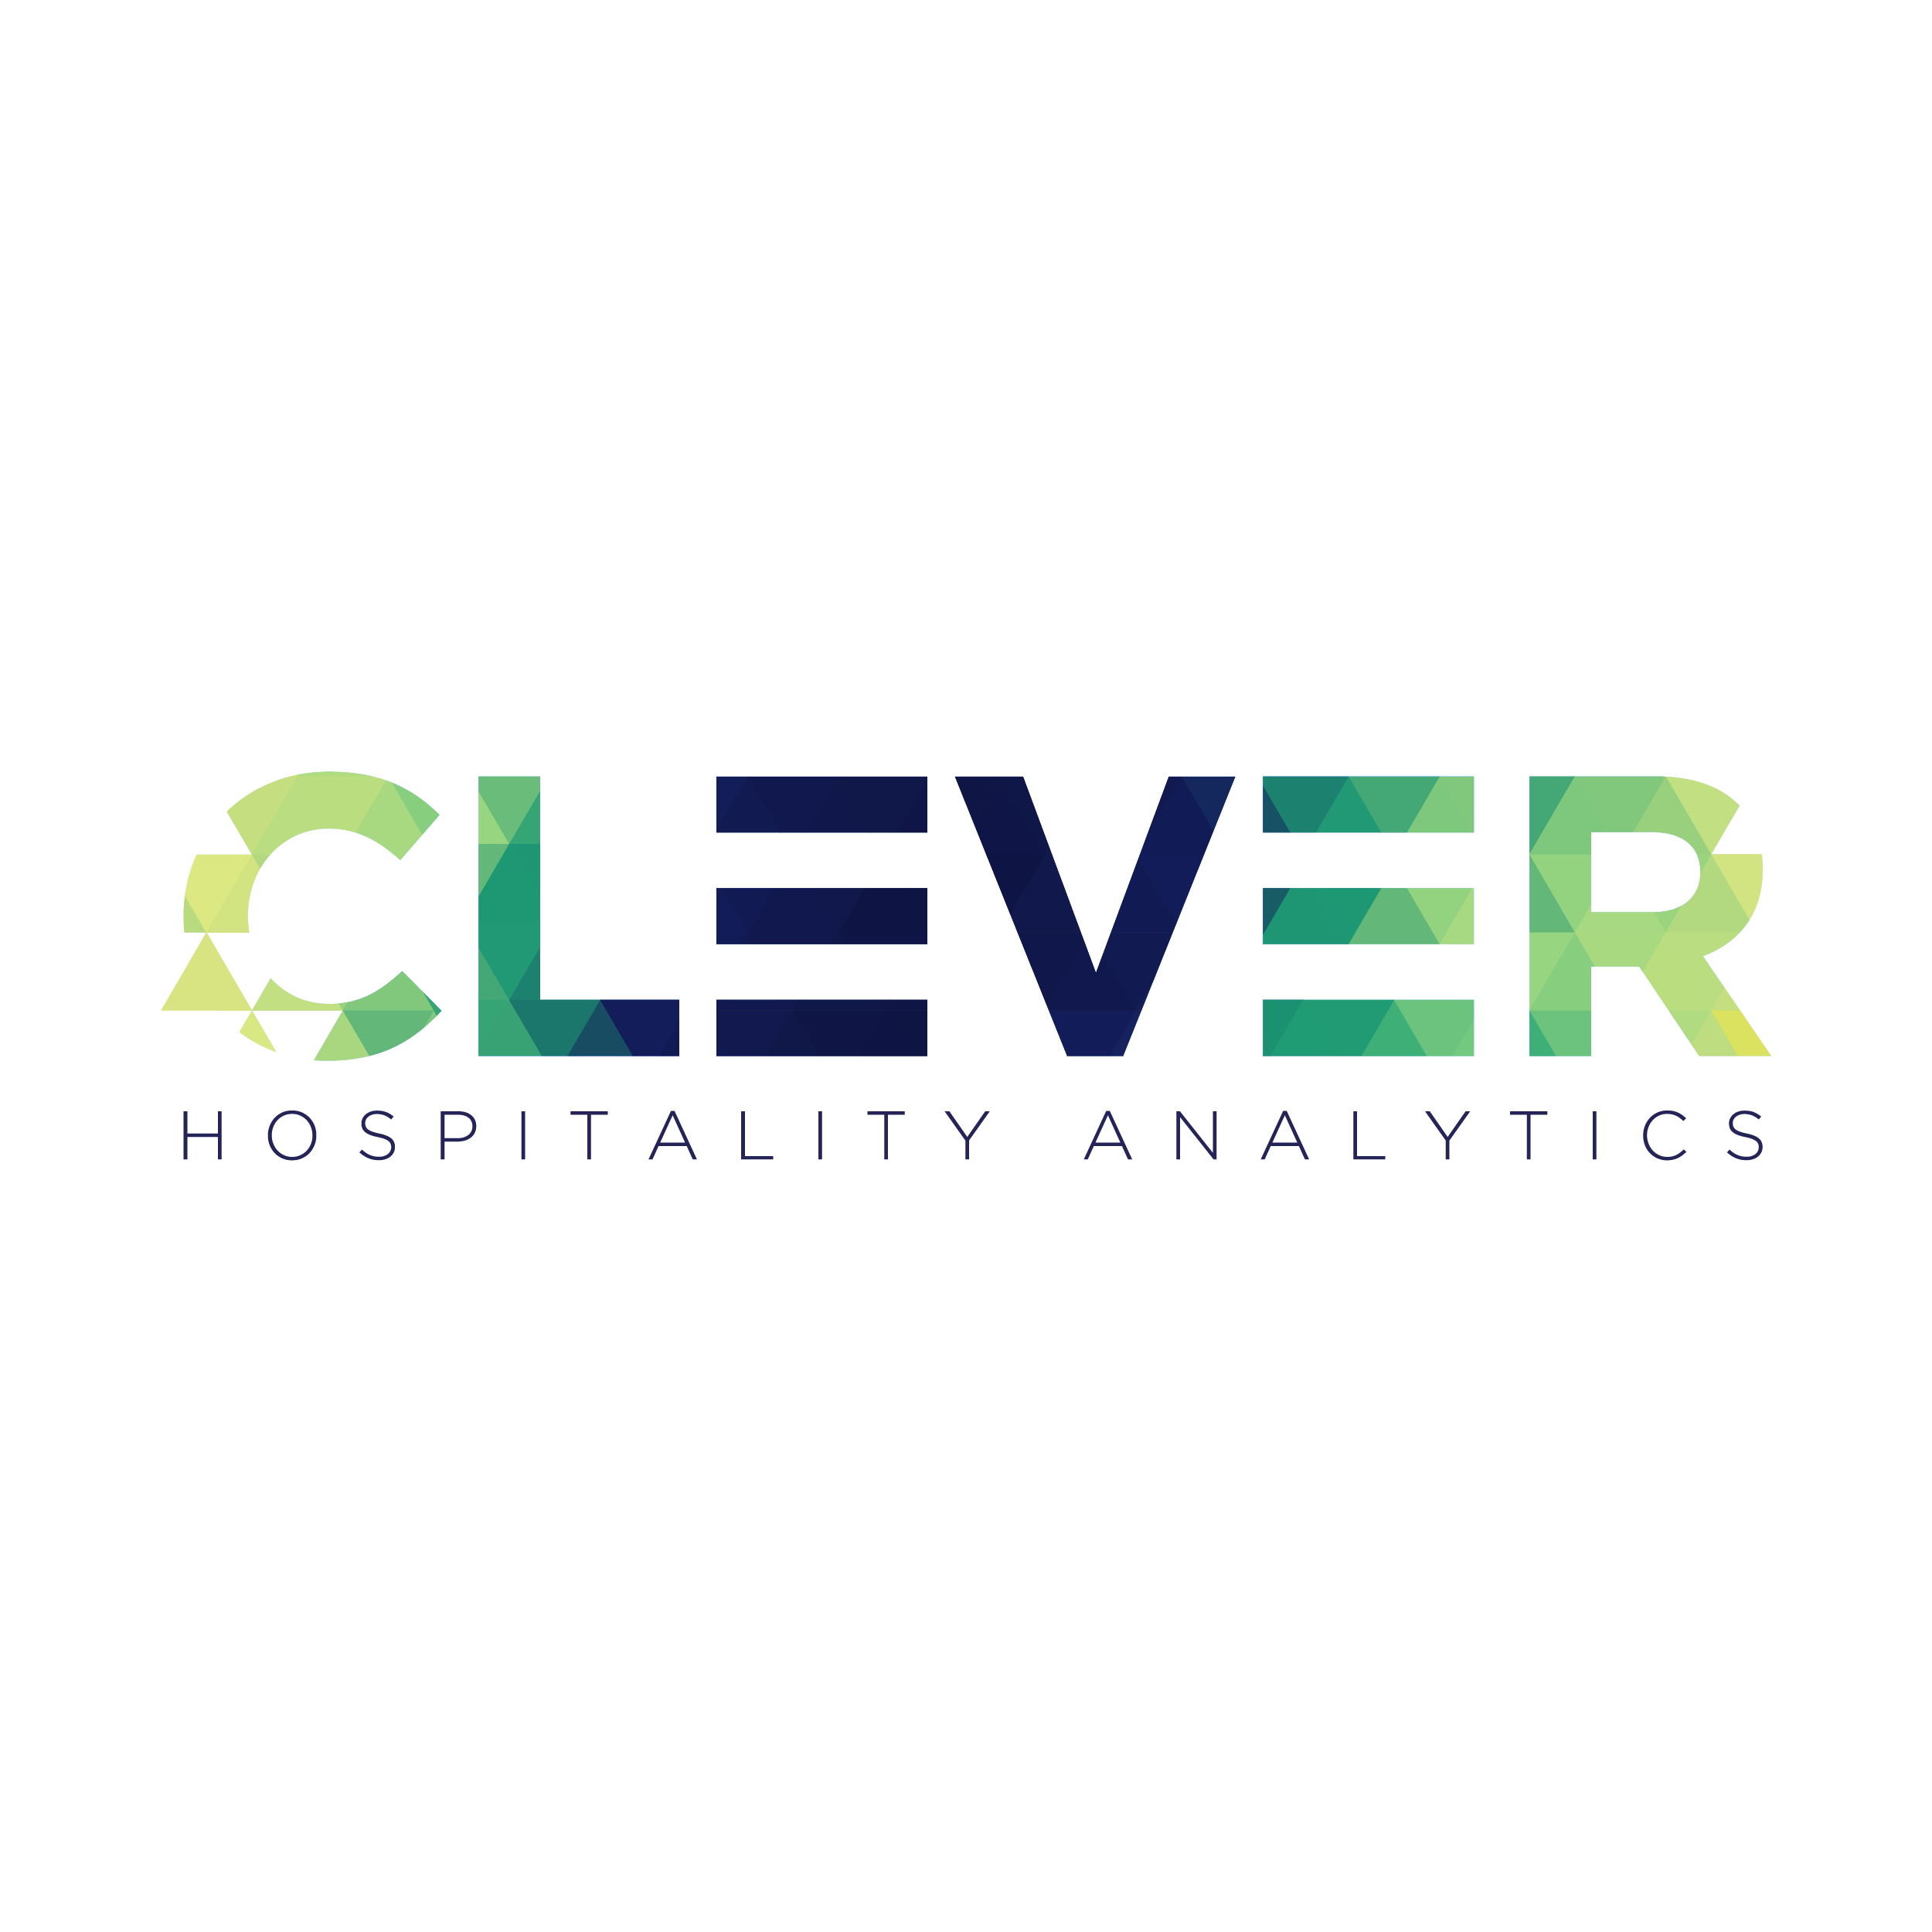 CLEVER-LOGO-rgb-01.png